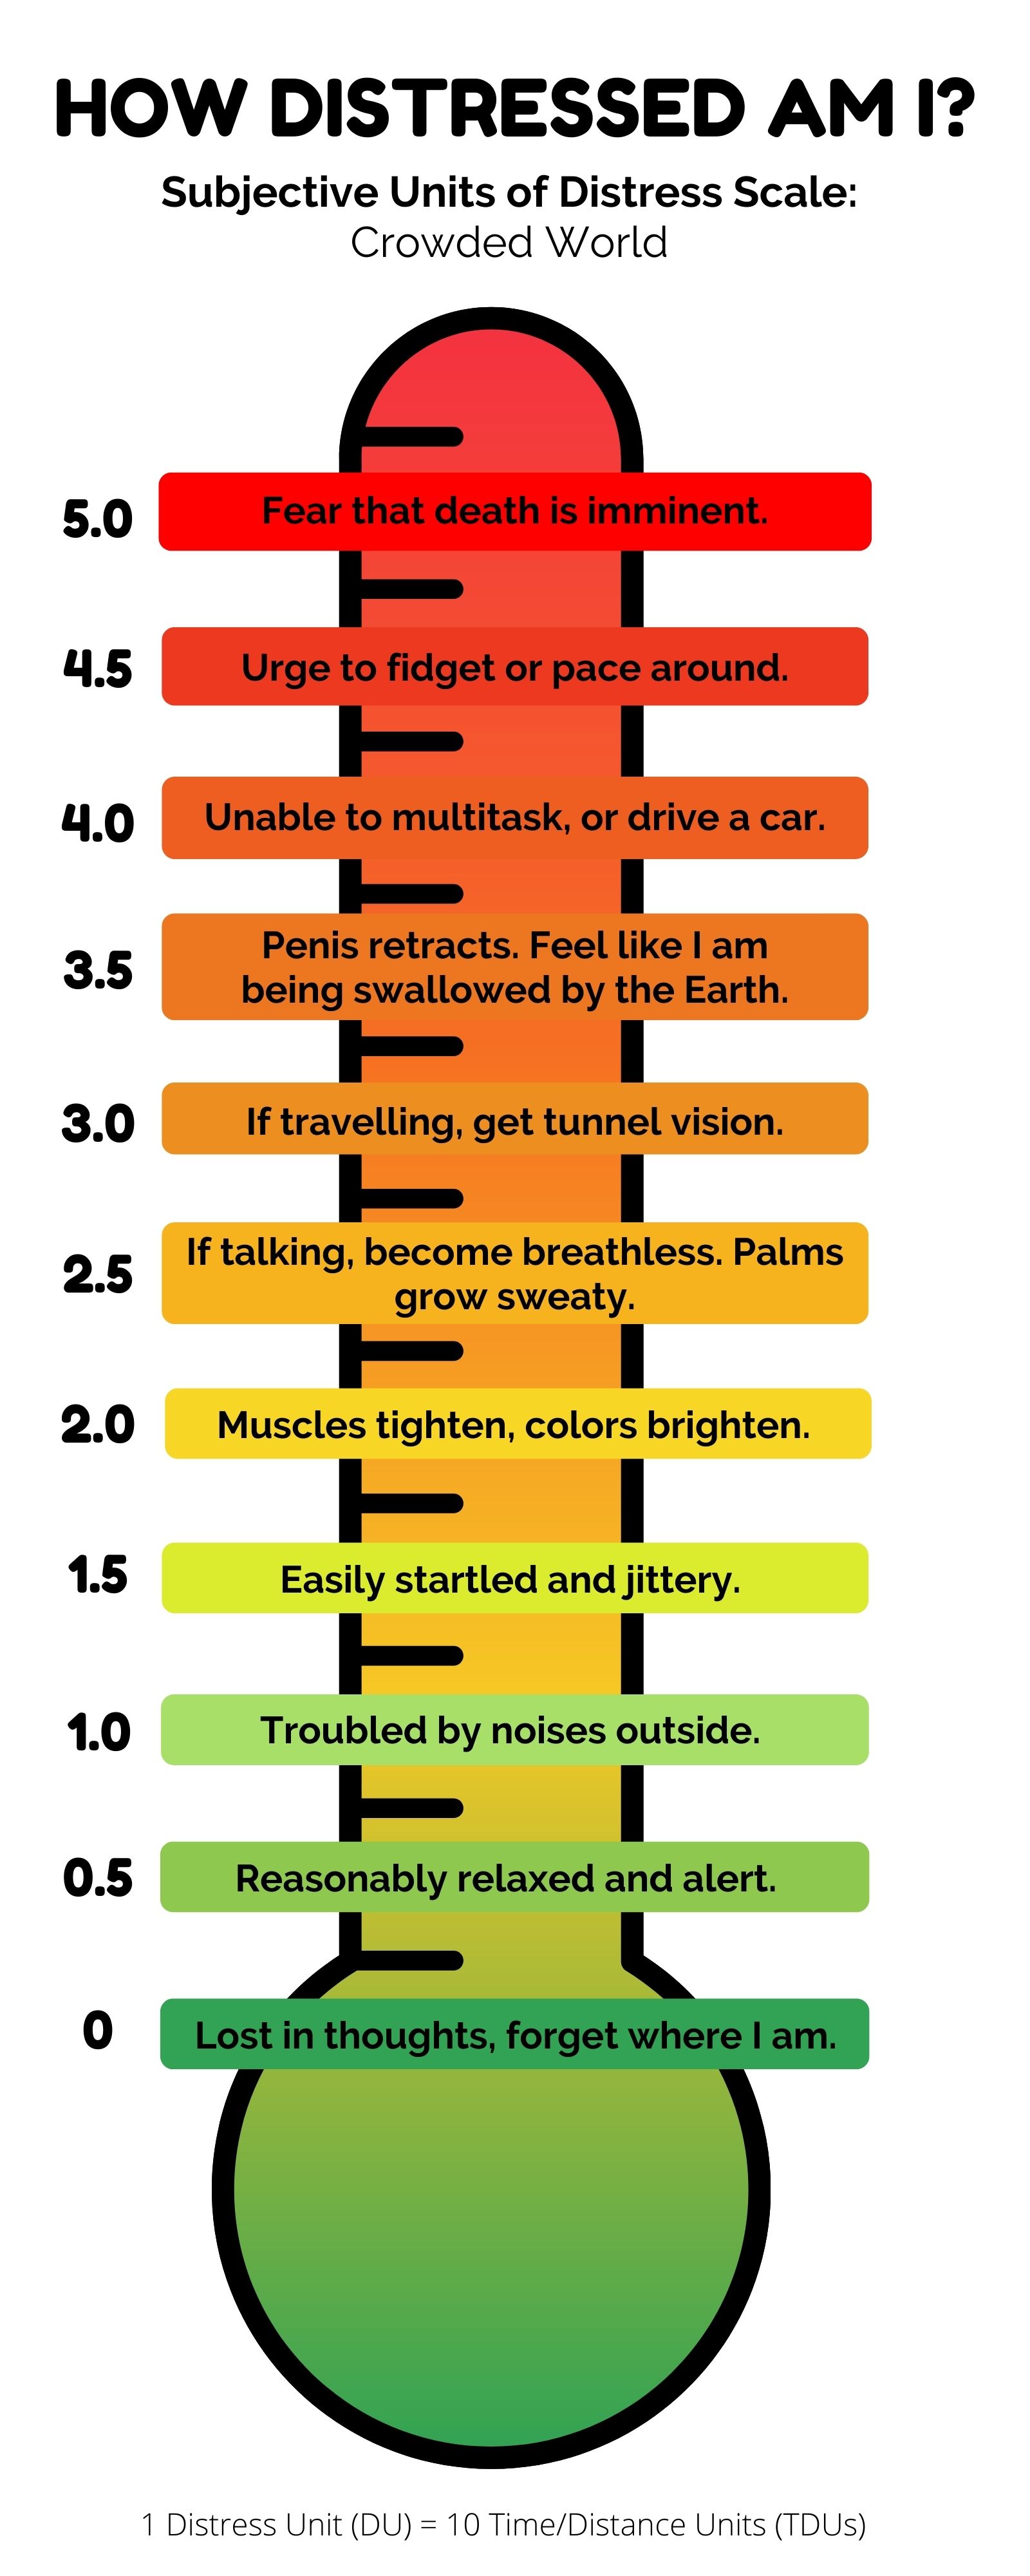 Subjective Distress Scale for Anxiety